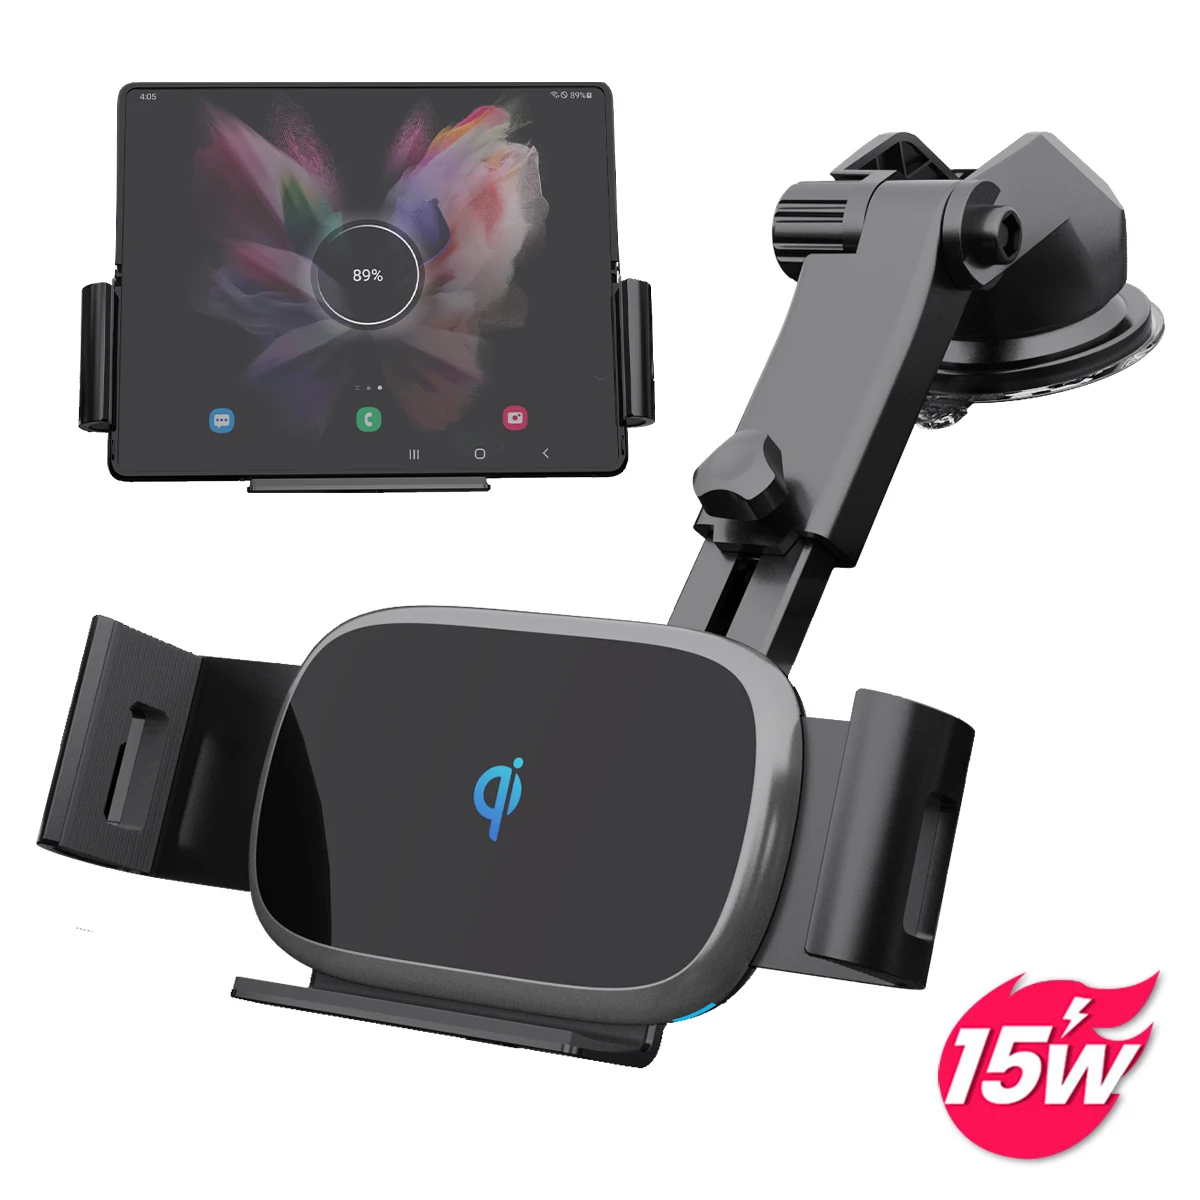 

Automatic Clamping Qi Kc 15W Fast 2 Coils Wireless Car Charger Air Vent Mount Phone Holder For Samsung Galaxy Z Fold 3 Z Flip 3